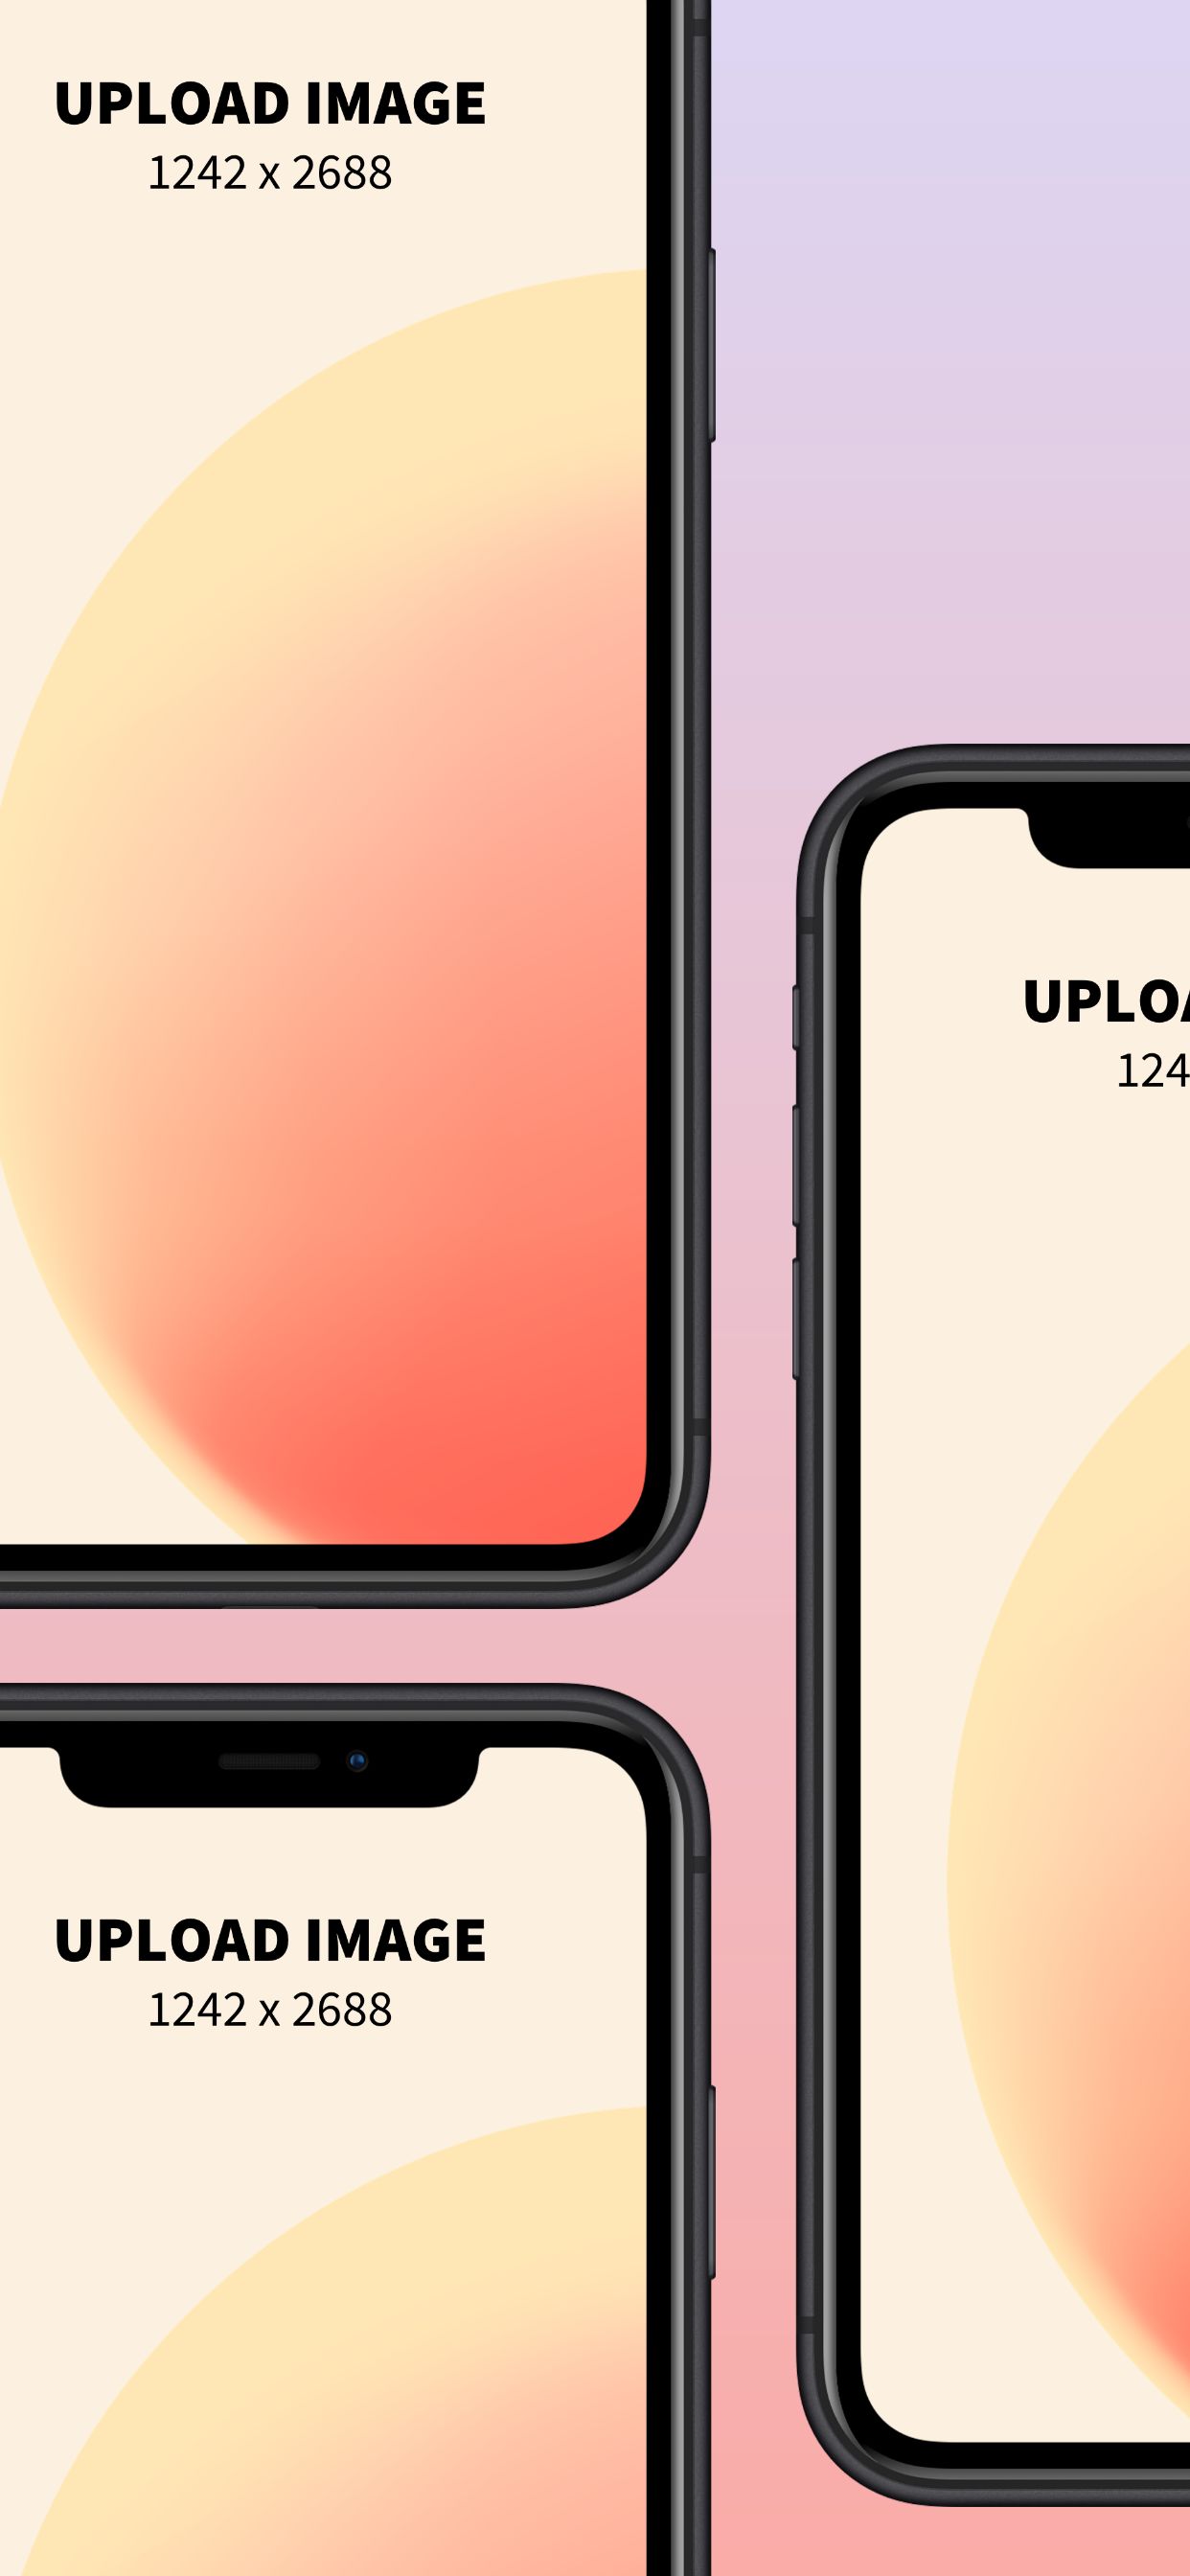 iPhone XS Max Screenshot 11 template. Quickly edit text, colors, images, and more for free.